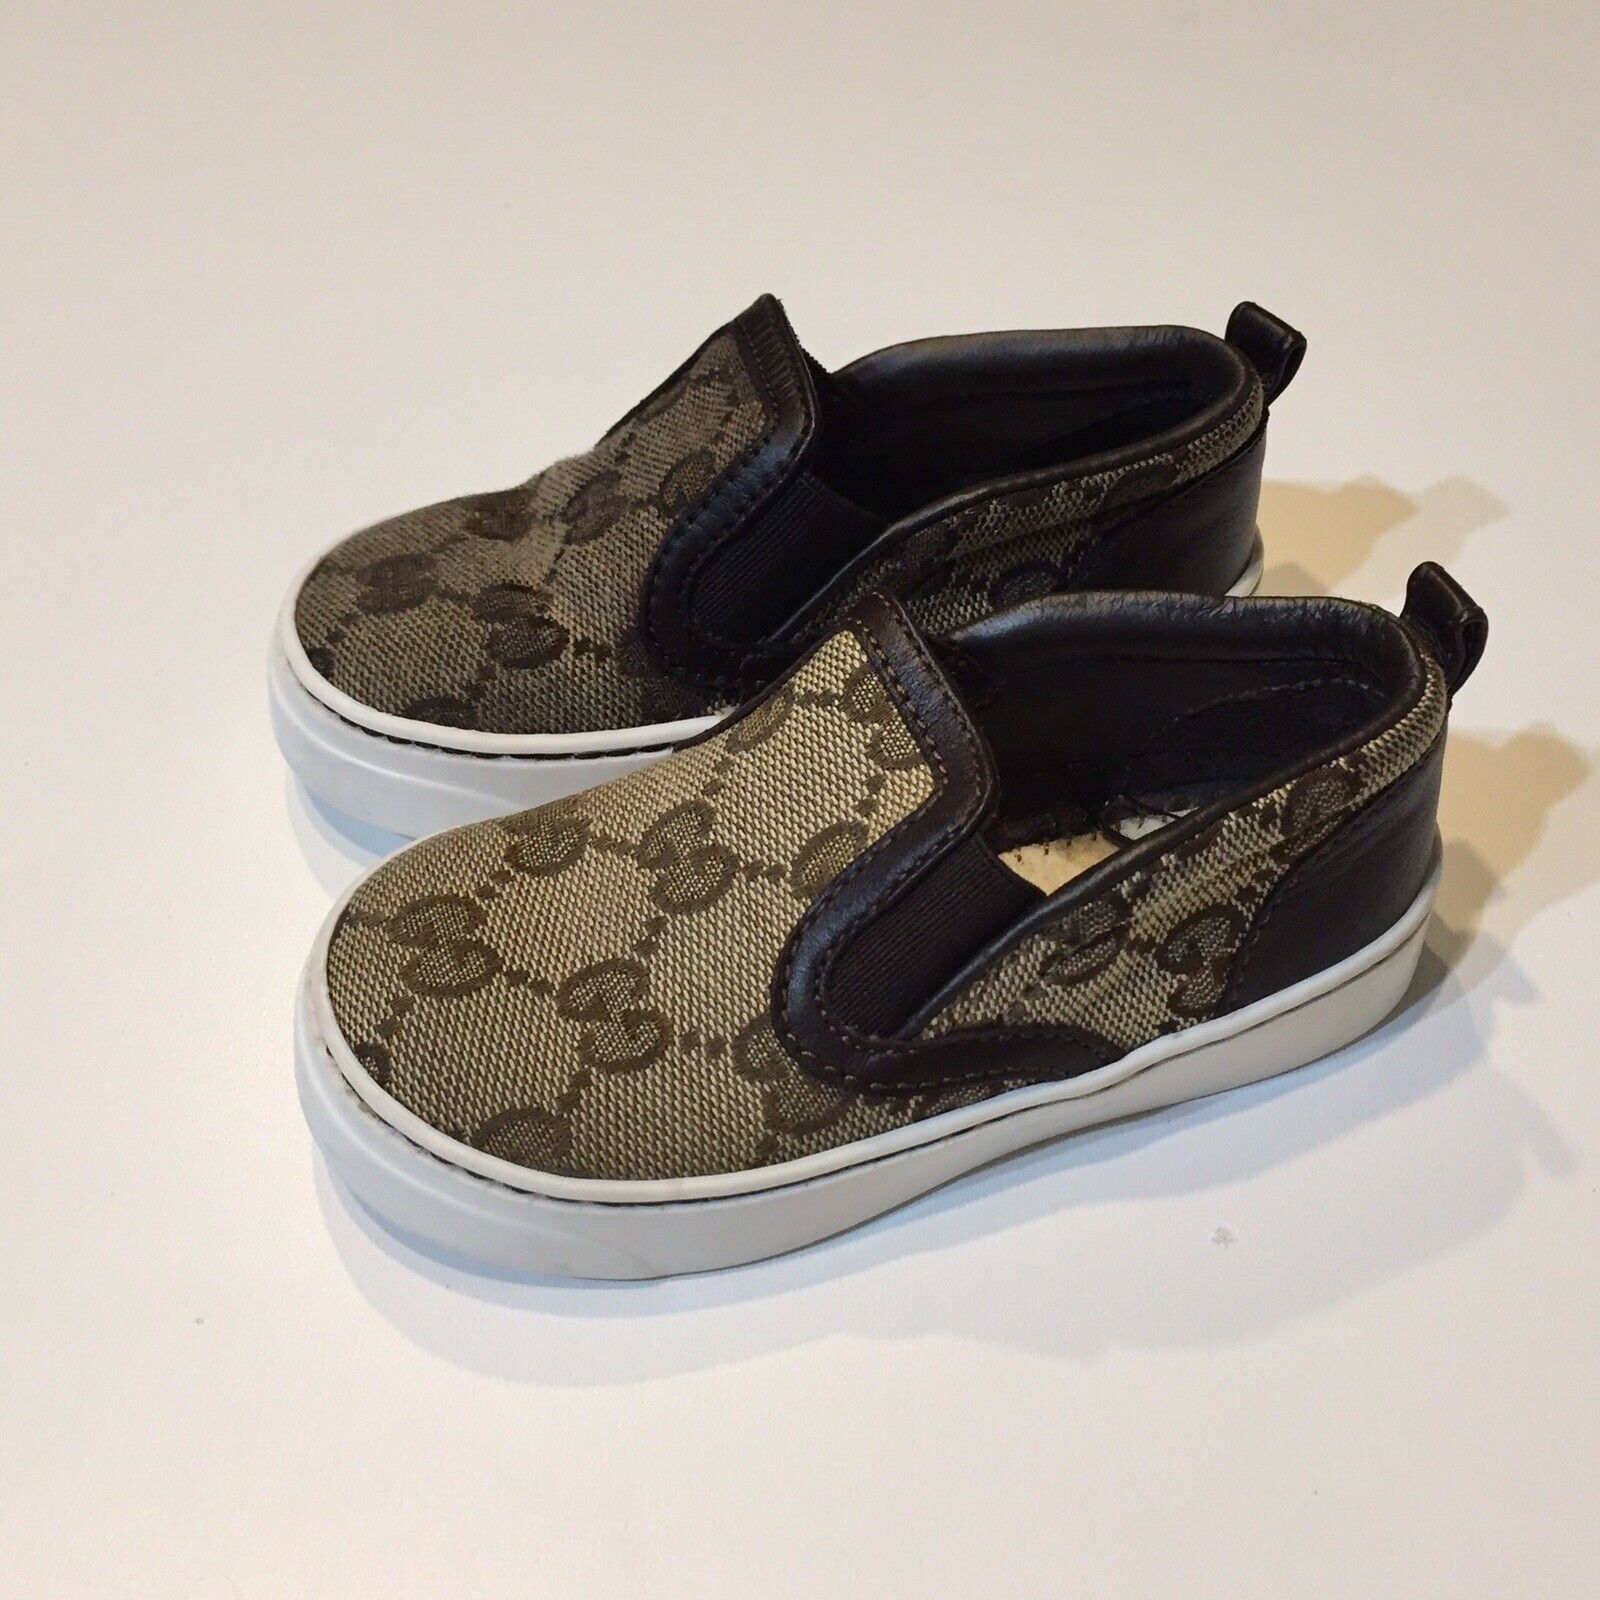 Gucci Shoes Slip On Gucci Logo Canvas Brown White Size 5 Toddler 257787 21